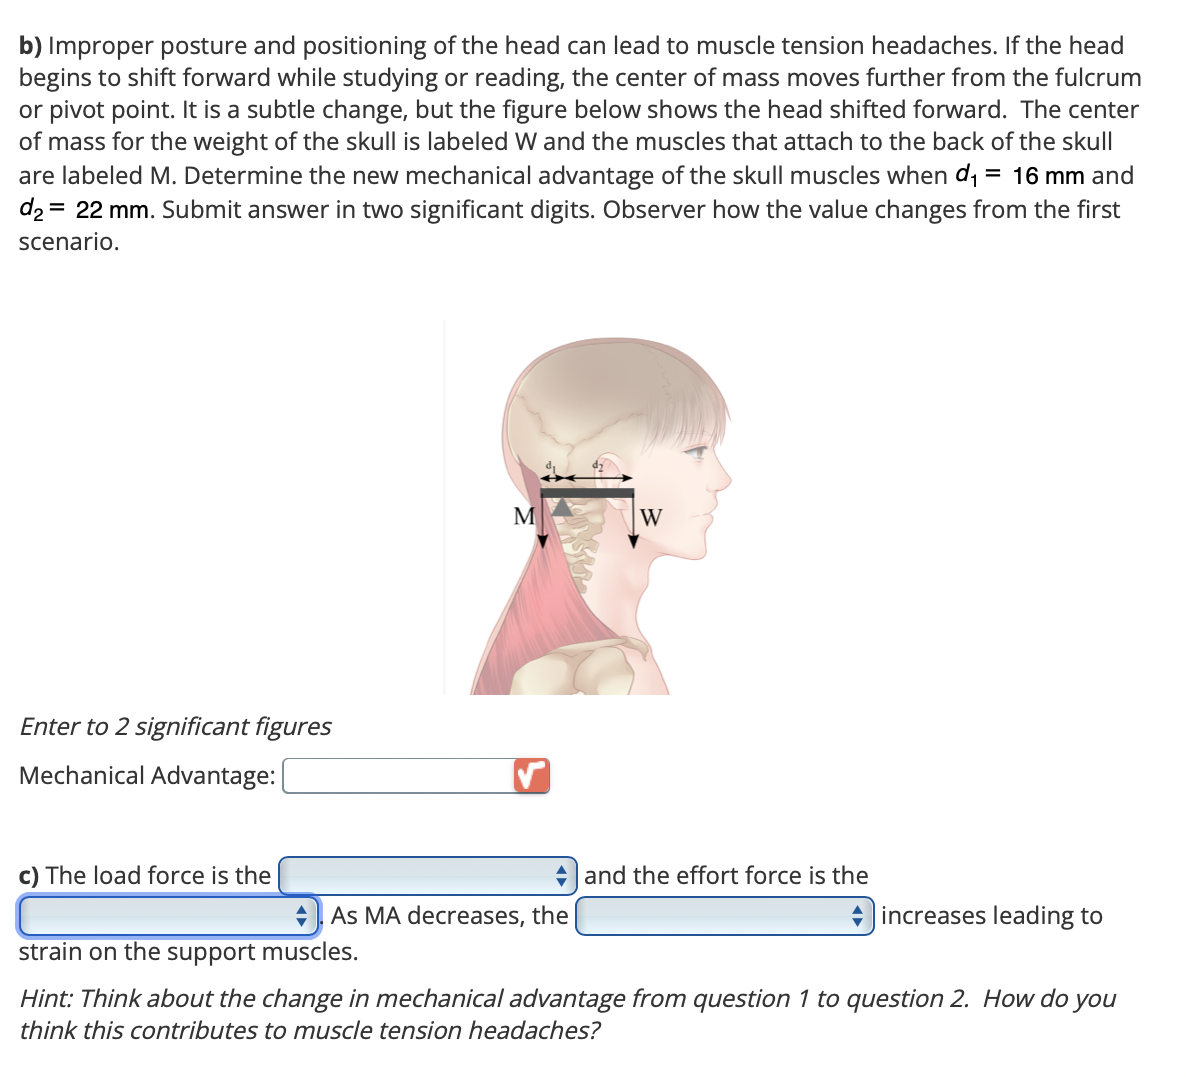 b) Improper posture and positioning of the head can lead to muscle tension headaches. If the head
begins to shift forward while studying or reading, the center of mass moves further from the fulcrum
or pivot point. It is a subtle change, but the figure below shows the head shifted forward. The center
of mass for the weight of the skull is labeled W and the muscles that attach to the back of the skull
are labeled M. Determine the new mechanical advantage of the skull muscles when d₁ = 16 mm and
d₂ = 22 mm. Submit answer in two significant digits. Observer how the value changes from the first
scenario.
Enter to 2 significant figures
Mechanical Advantage:
c) The load force is the
M
strain on the support muscles.
◆ As MA decreases, the
W
◆ and the effort force is the
increases leading to
Hint: Think about the change in mechanical advantage from question 1 to question 2. How do you
think this contributes to muscle tension headaches?